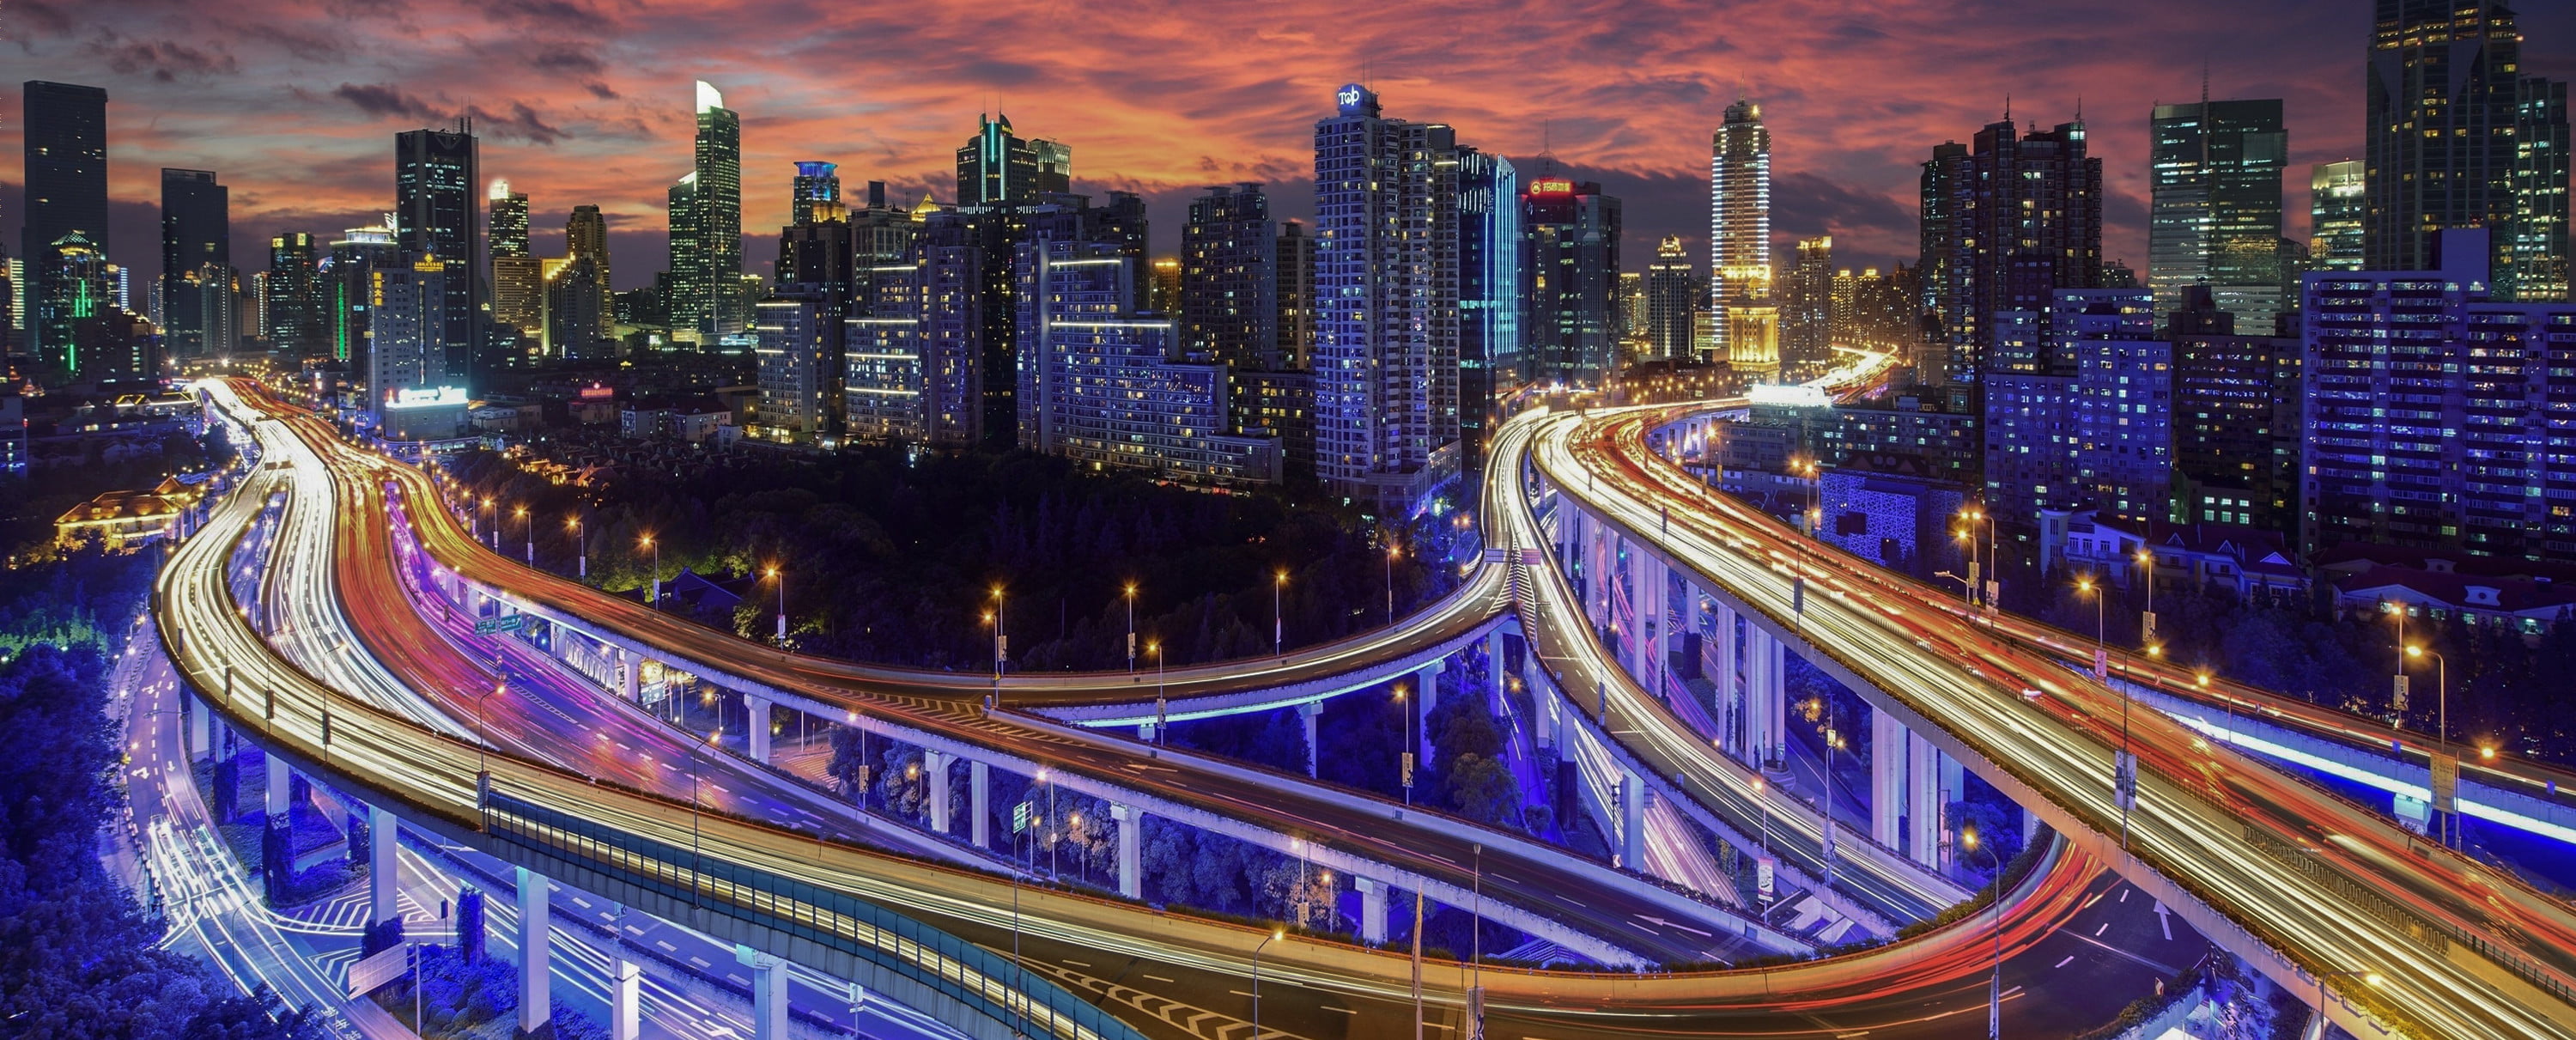 Data-Driven Smart Cities are our Connected Urban Future | Digital Trends